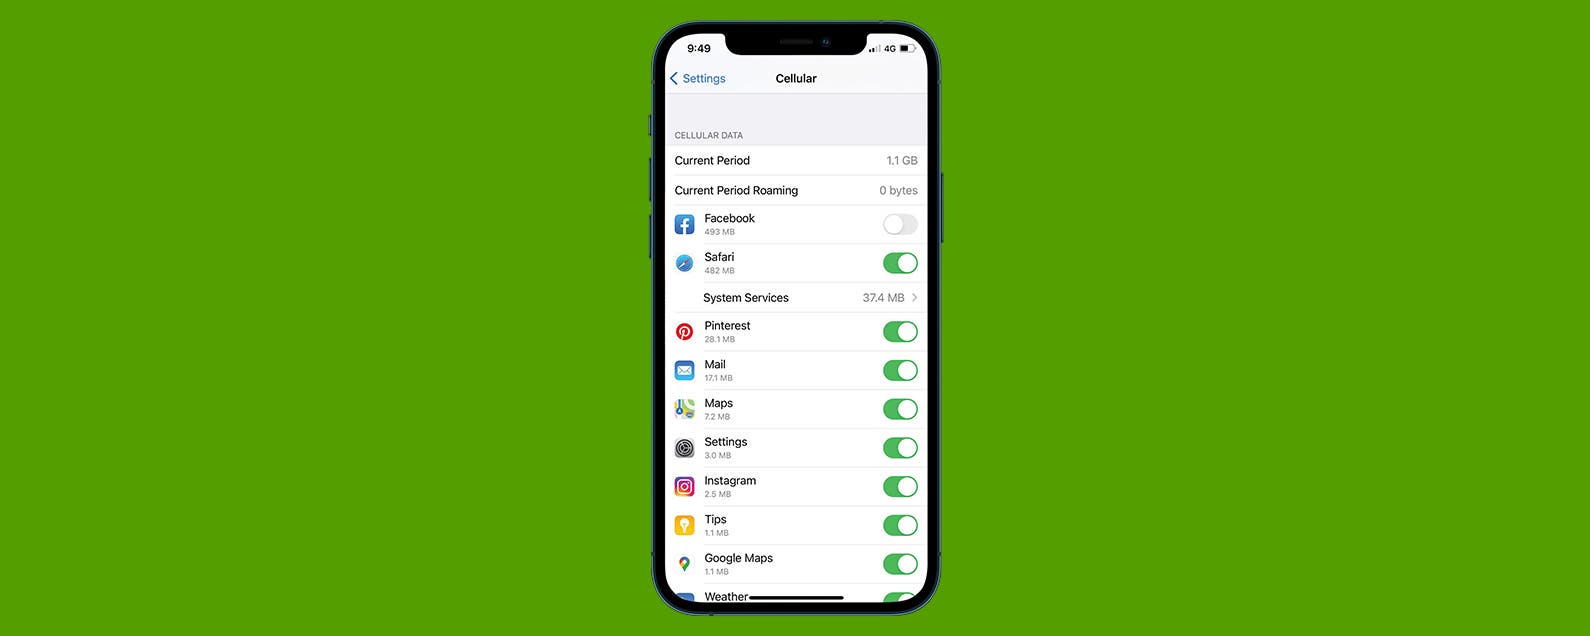 Save Data on Your iPhone: How to Check What Apps Are Using the Most Data